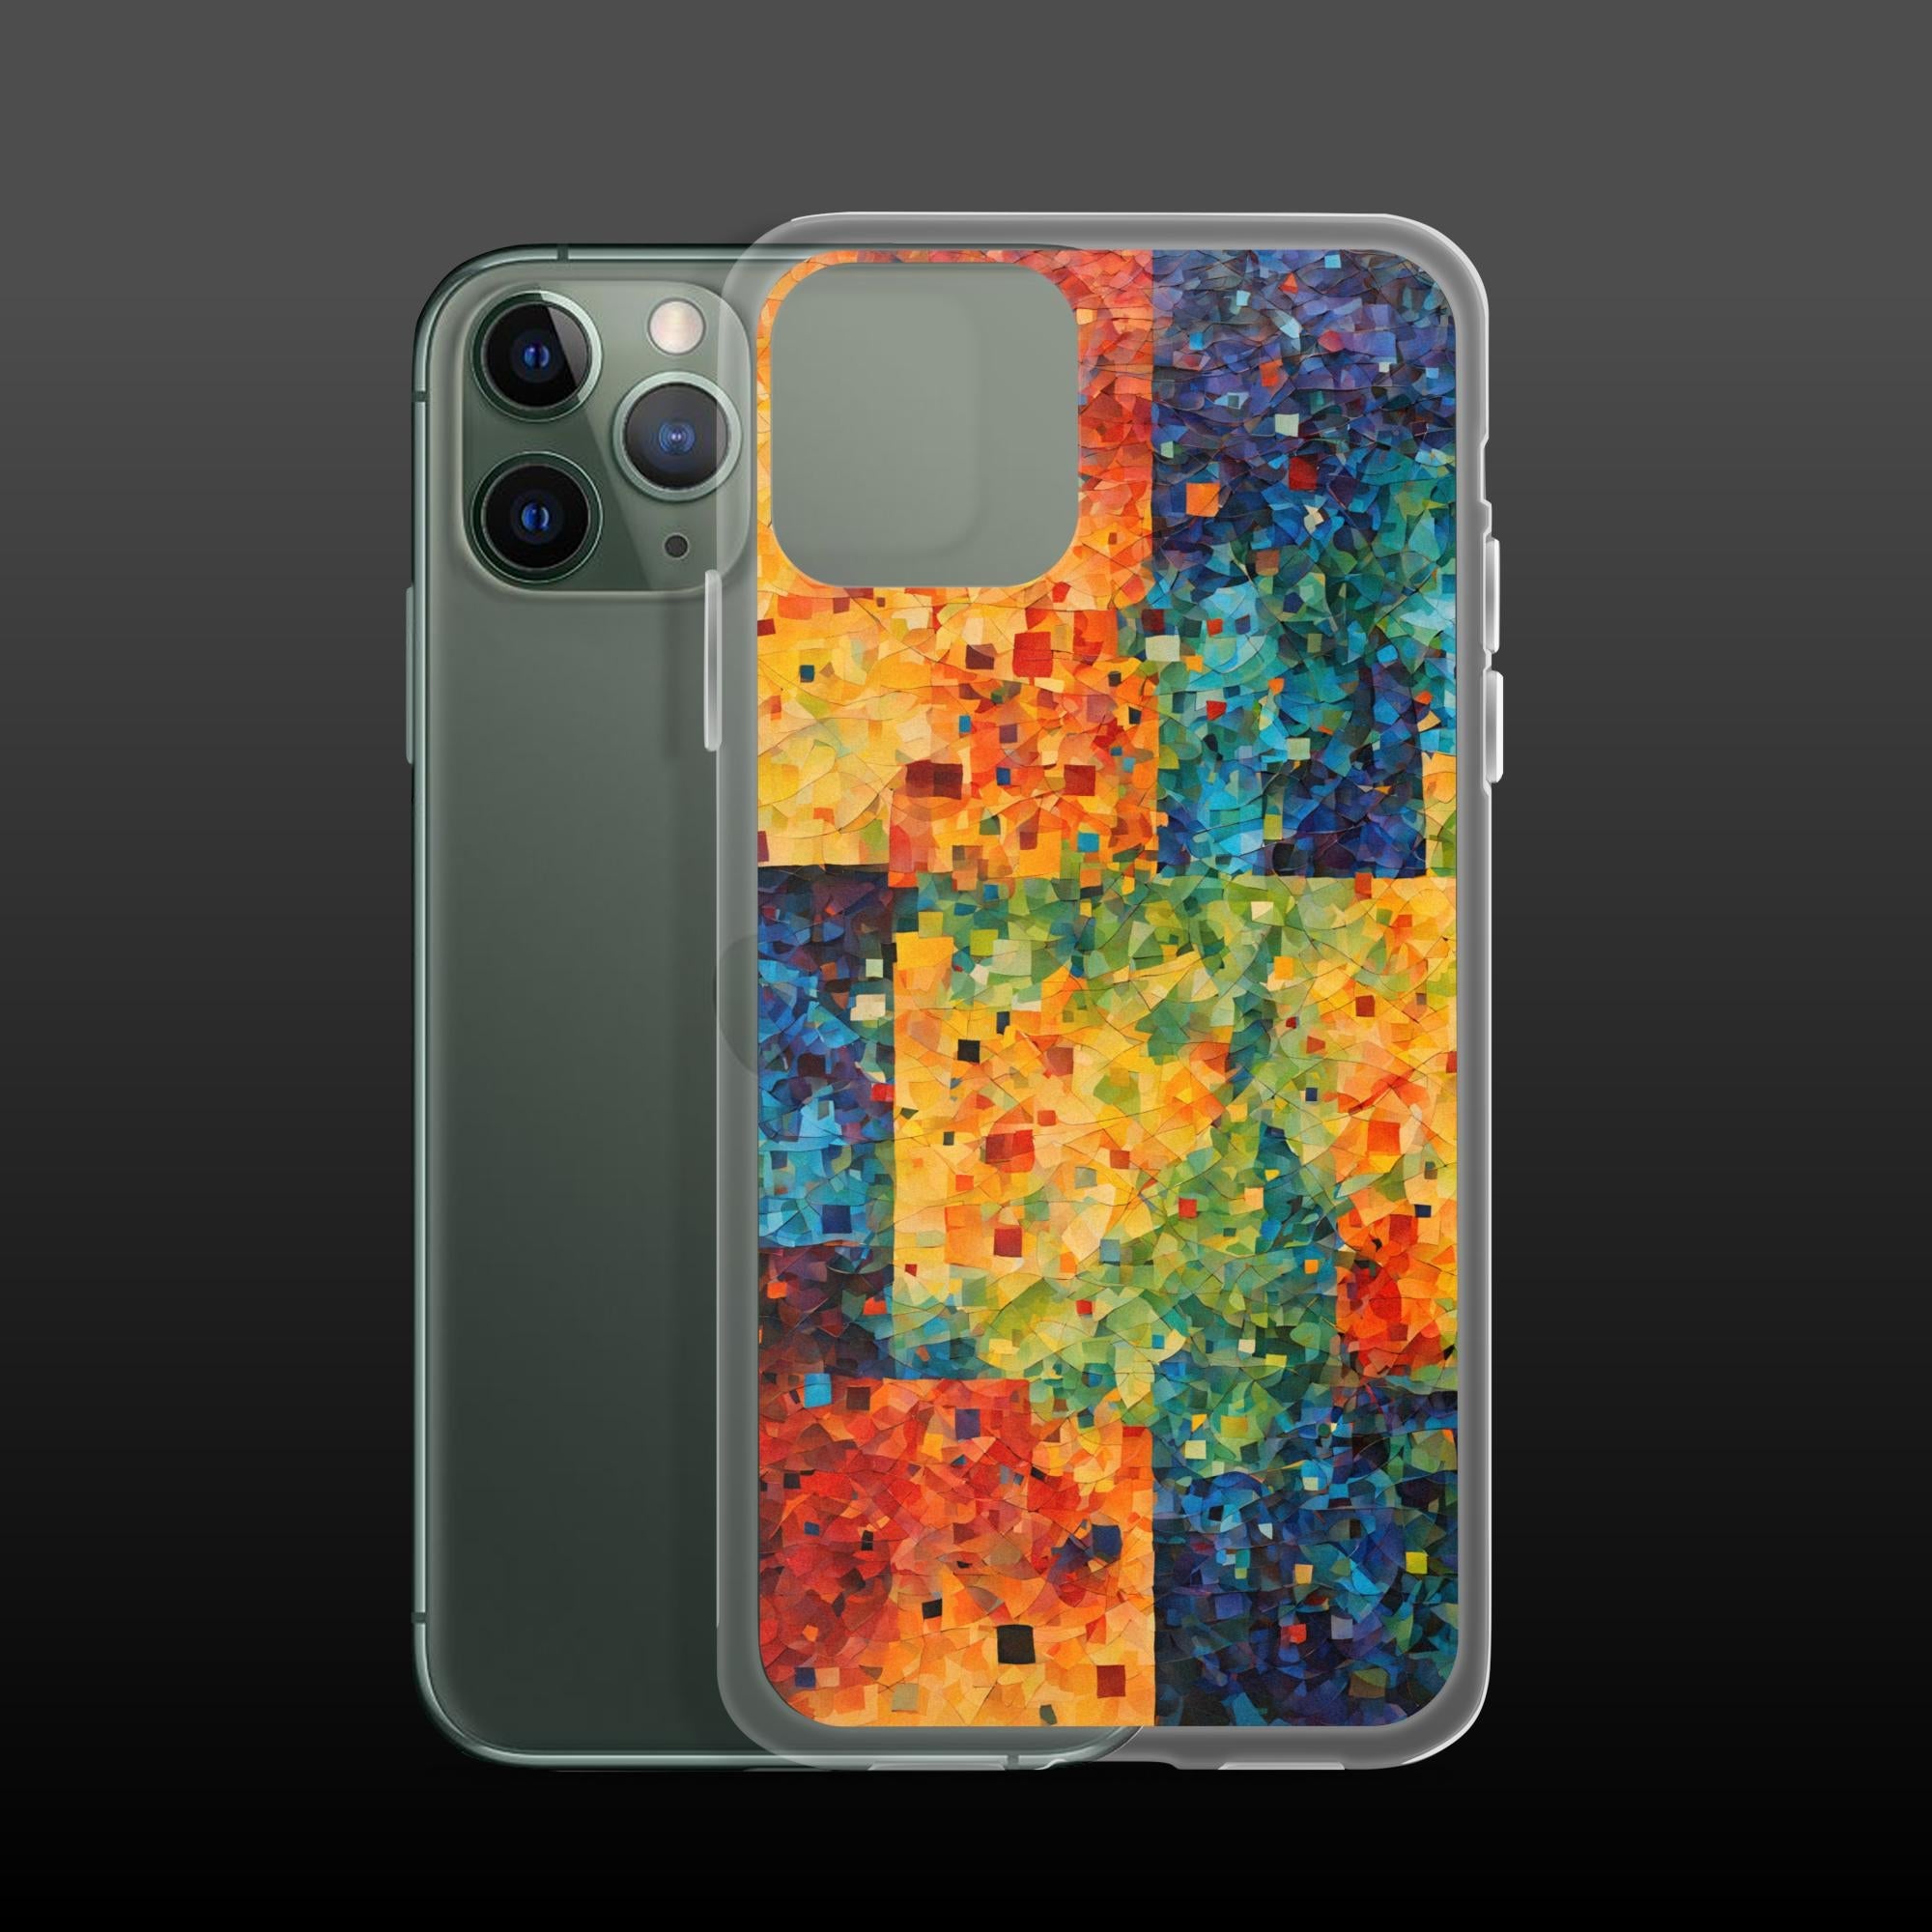 "Exciting beginnings" clear iphone case - Clear iphone case - Ever colorful